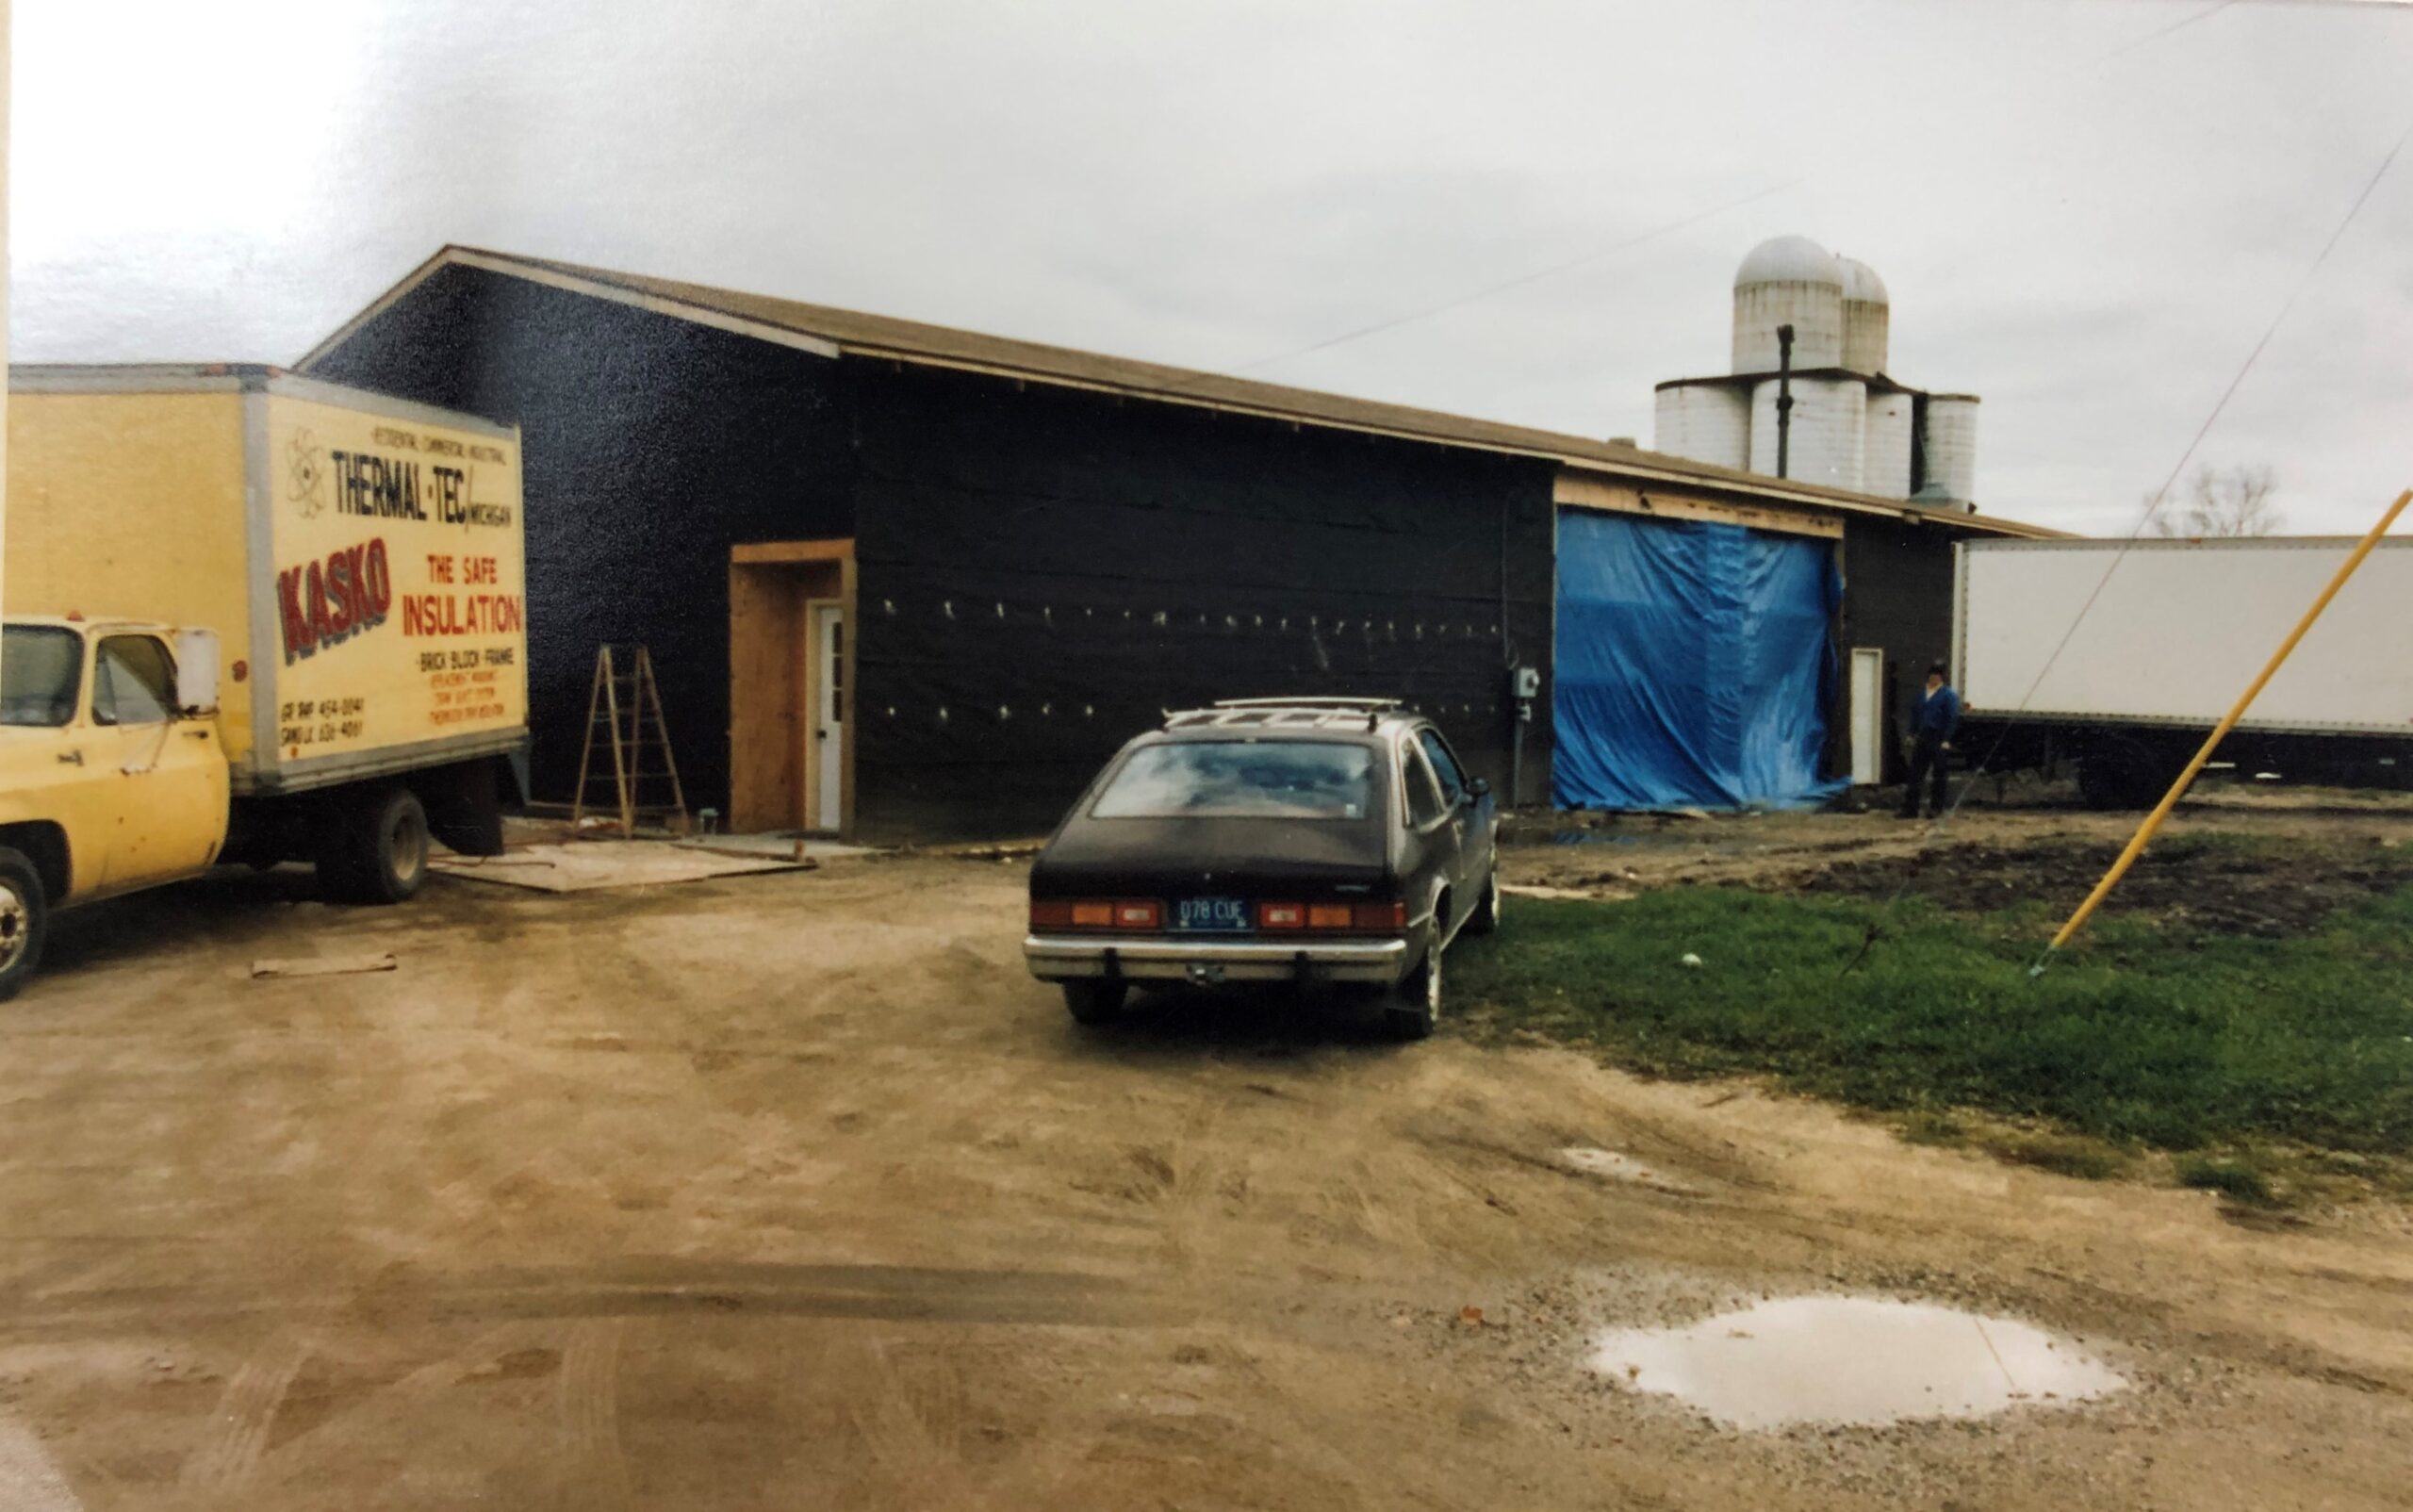 Thermal-Tec's first location in Sand Lake,MI - 1983